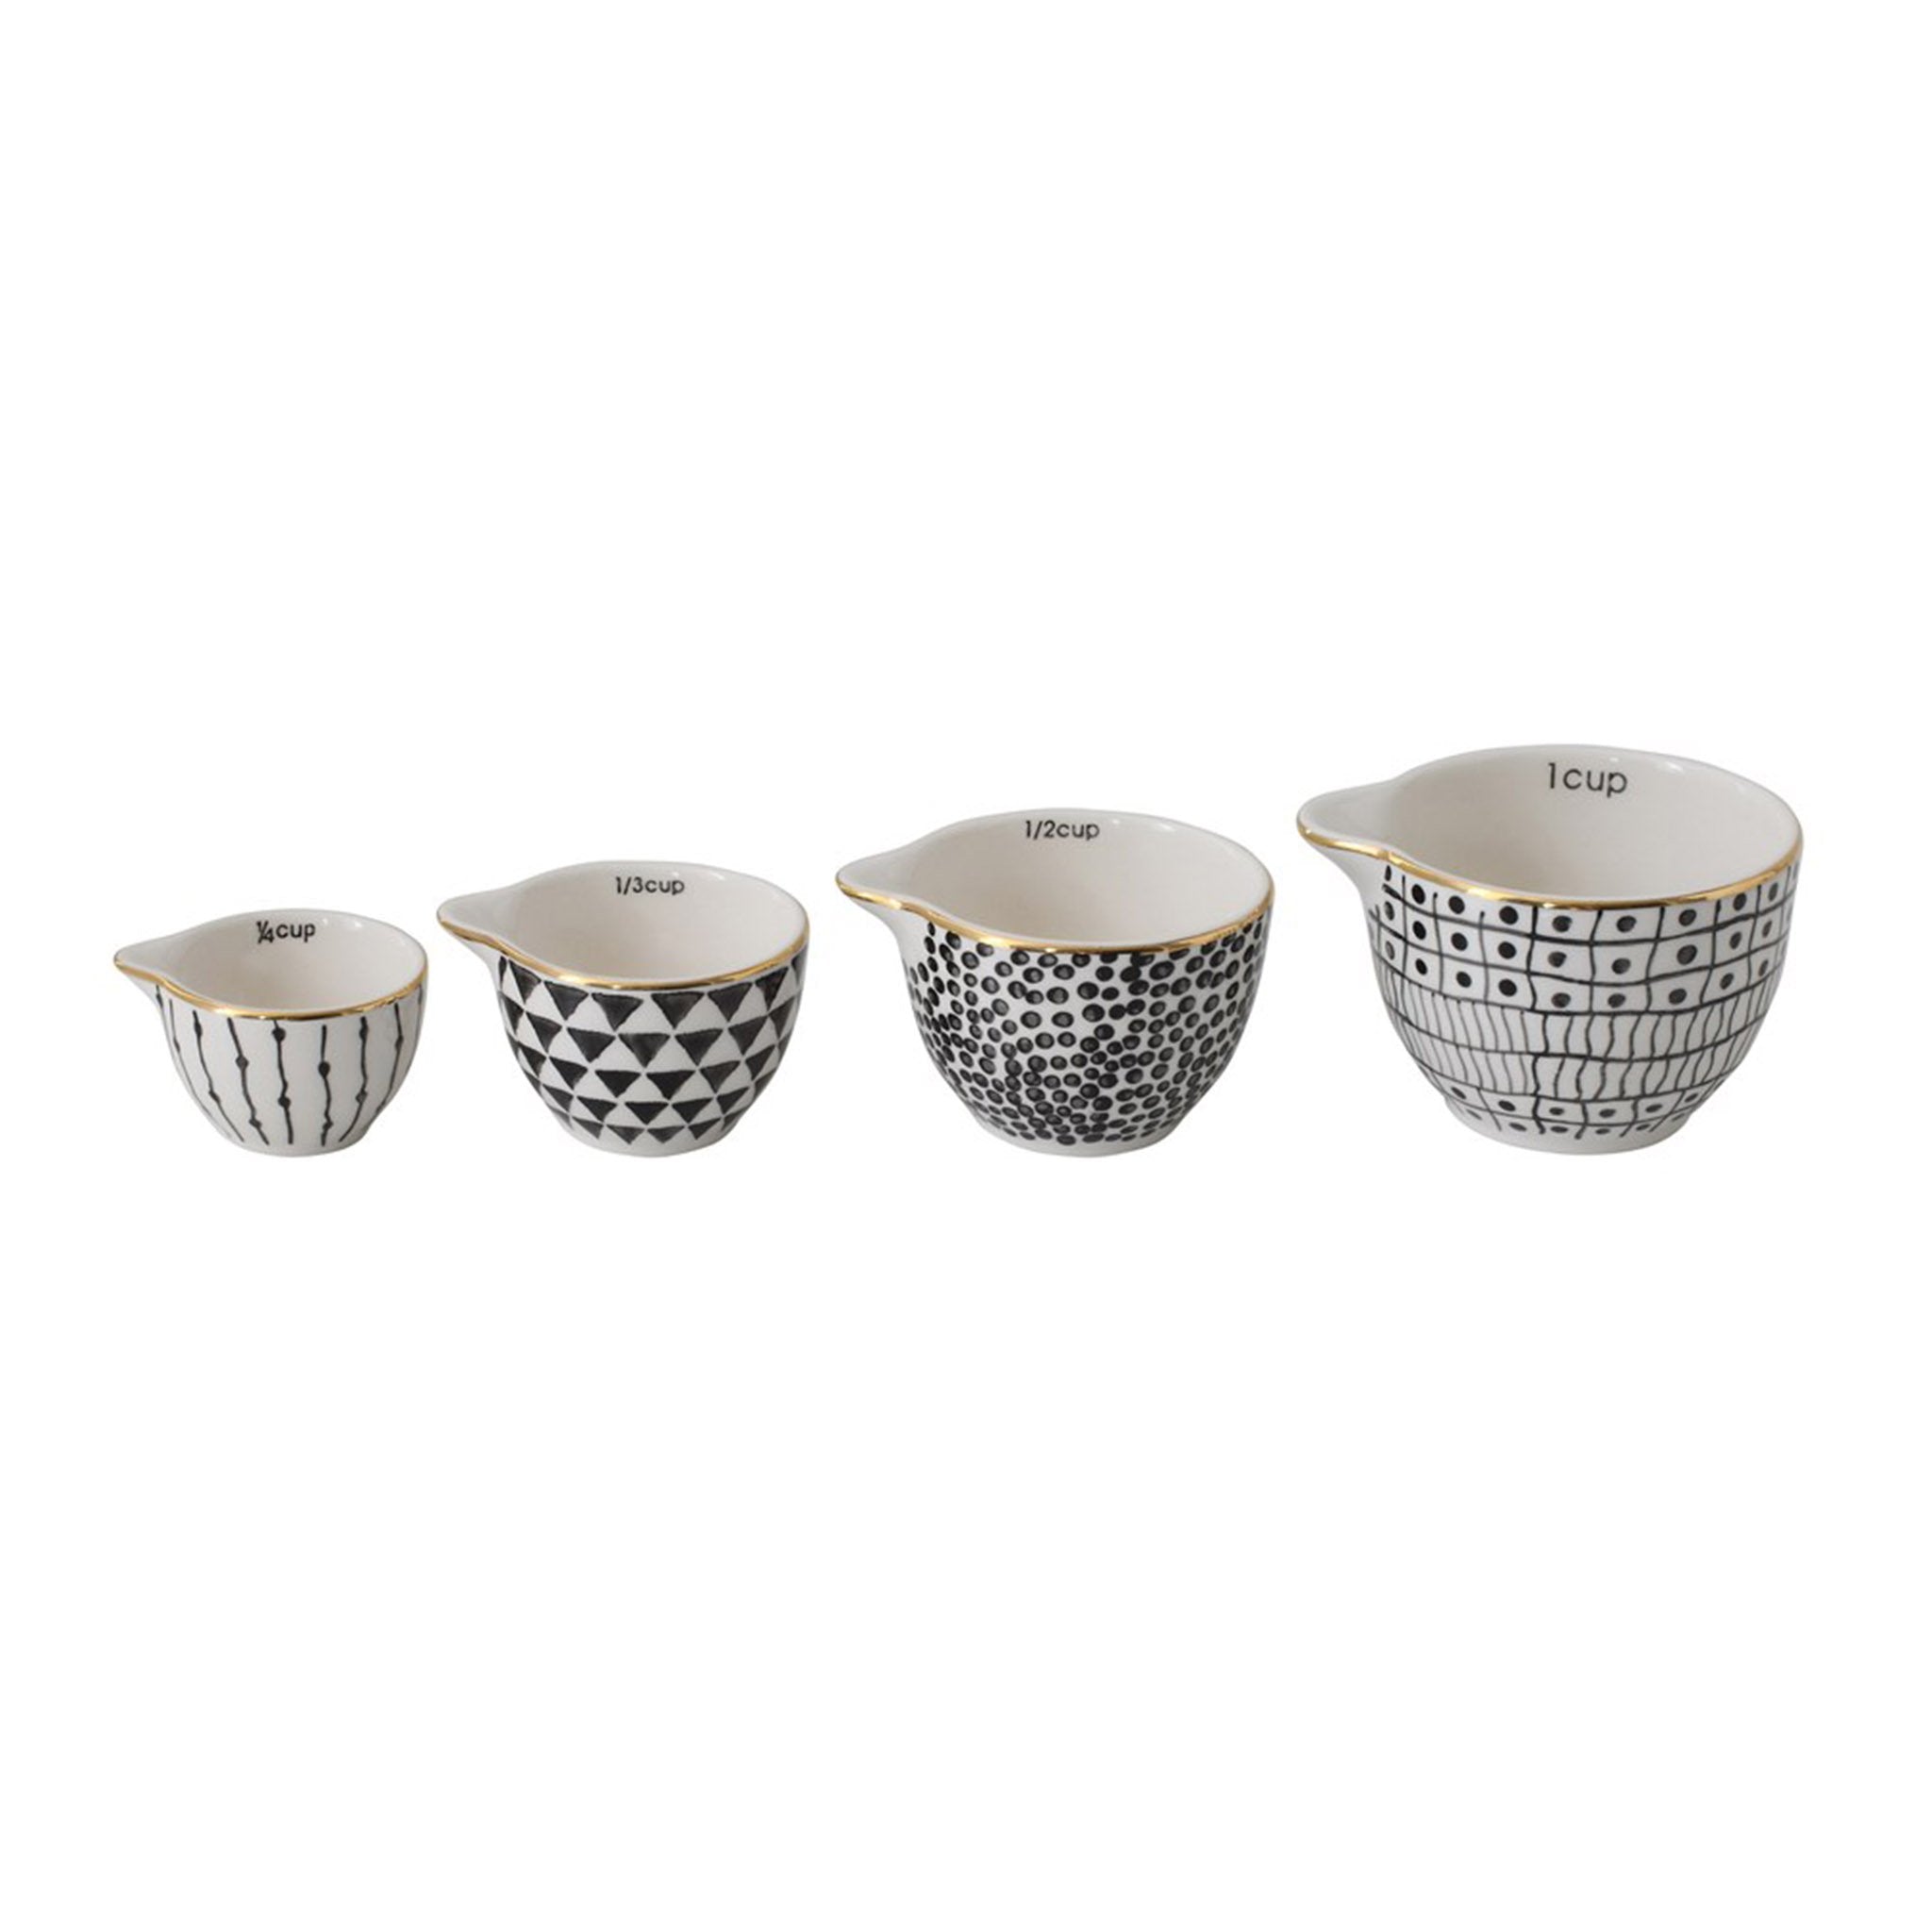 Stoneware Batter Bowl Measuring Cups (Set of 4), Creative Co-Op